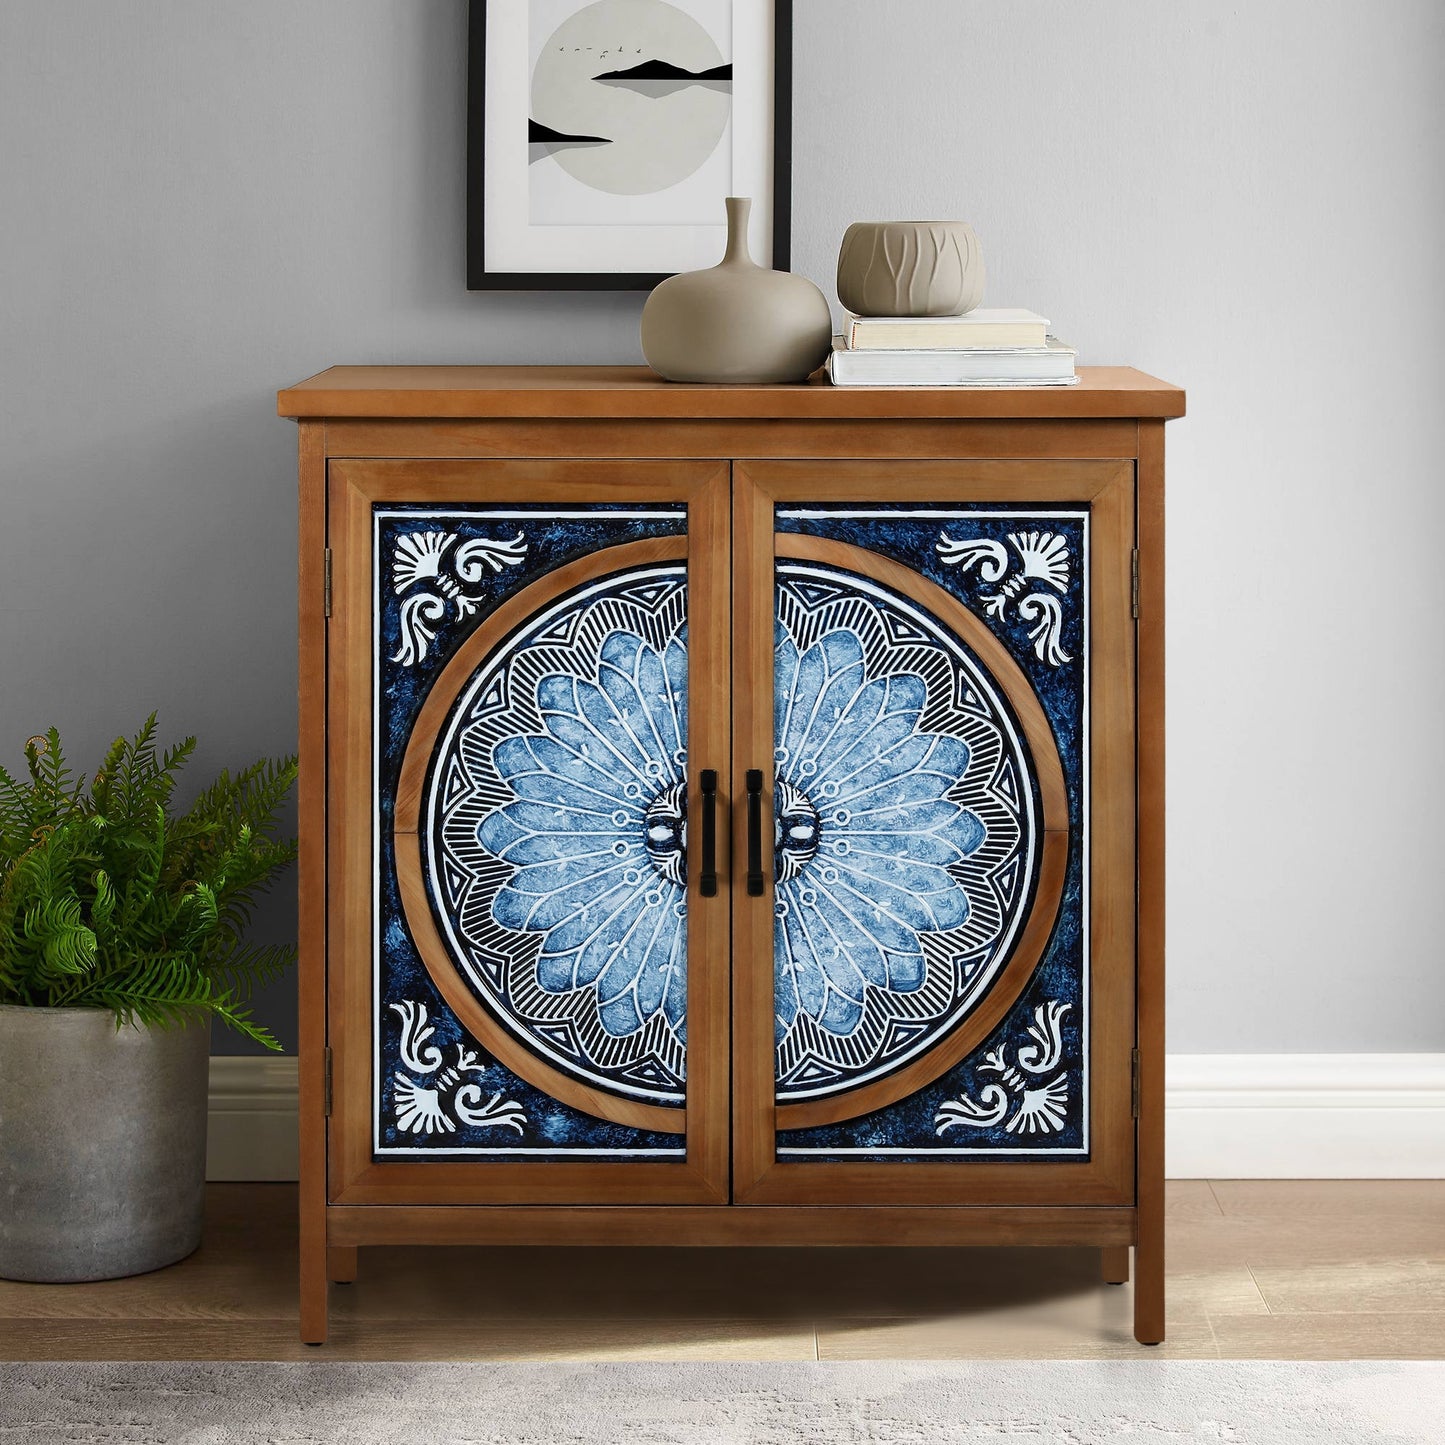 Alpha Joy 2-Door Accent Cabinet with Blue and White Porcelain Pattern for Dining Room, Living Room,Hallway